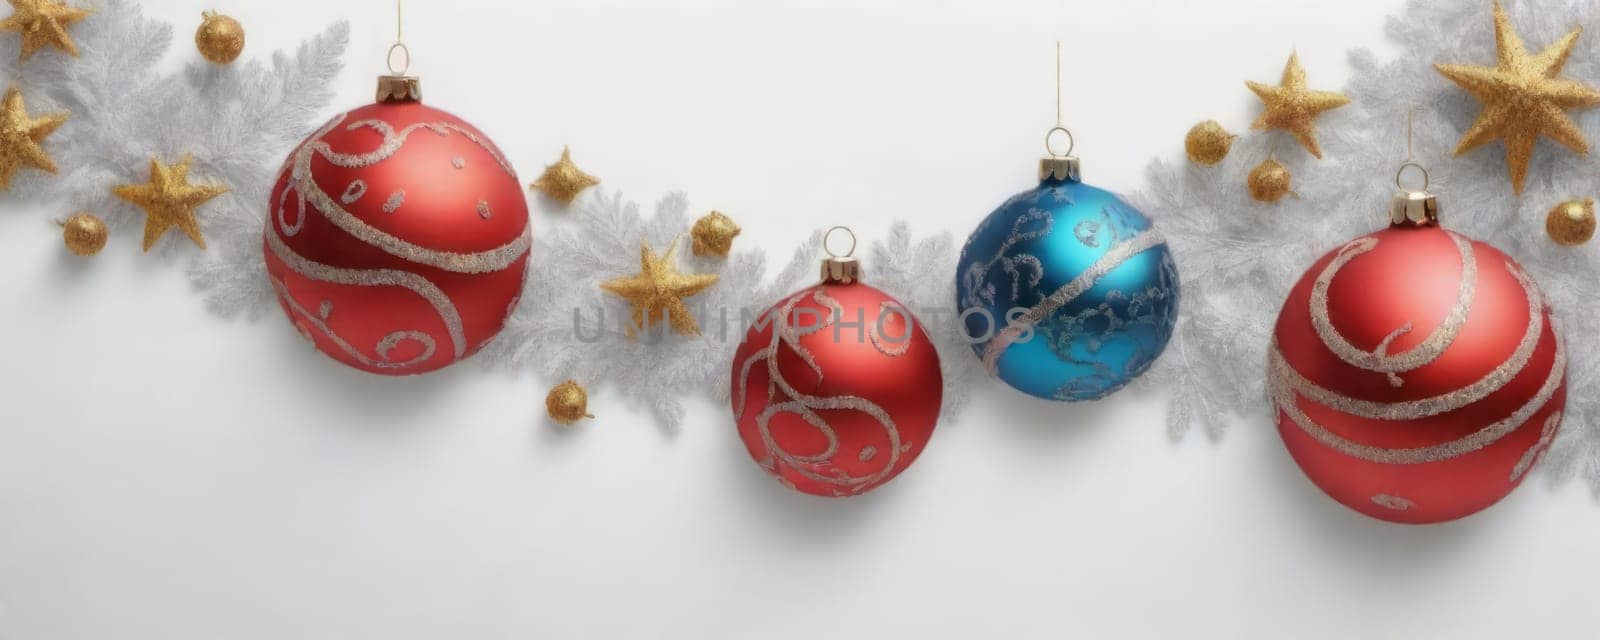 A vibrant display of red and blue baubles amidst frosty pine branches, accented with golden stars against a white background